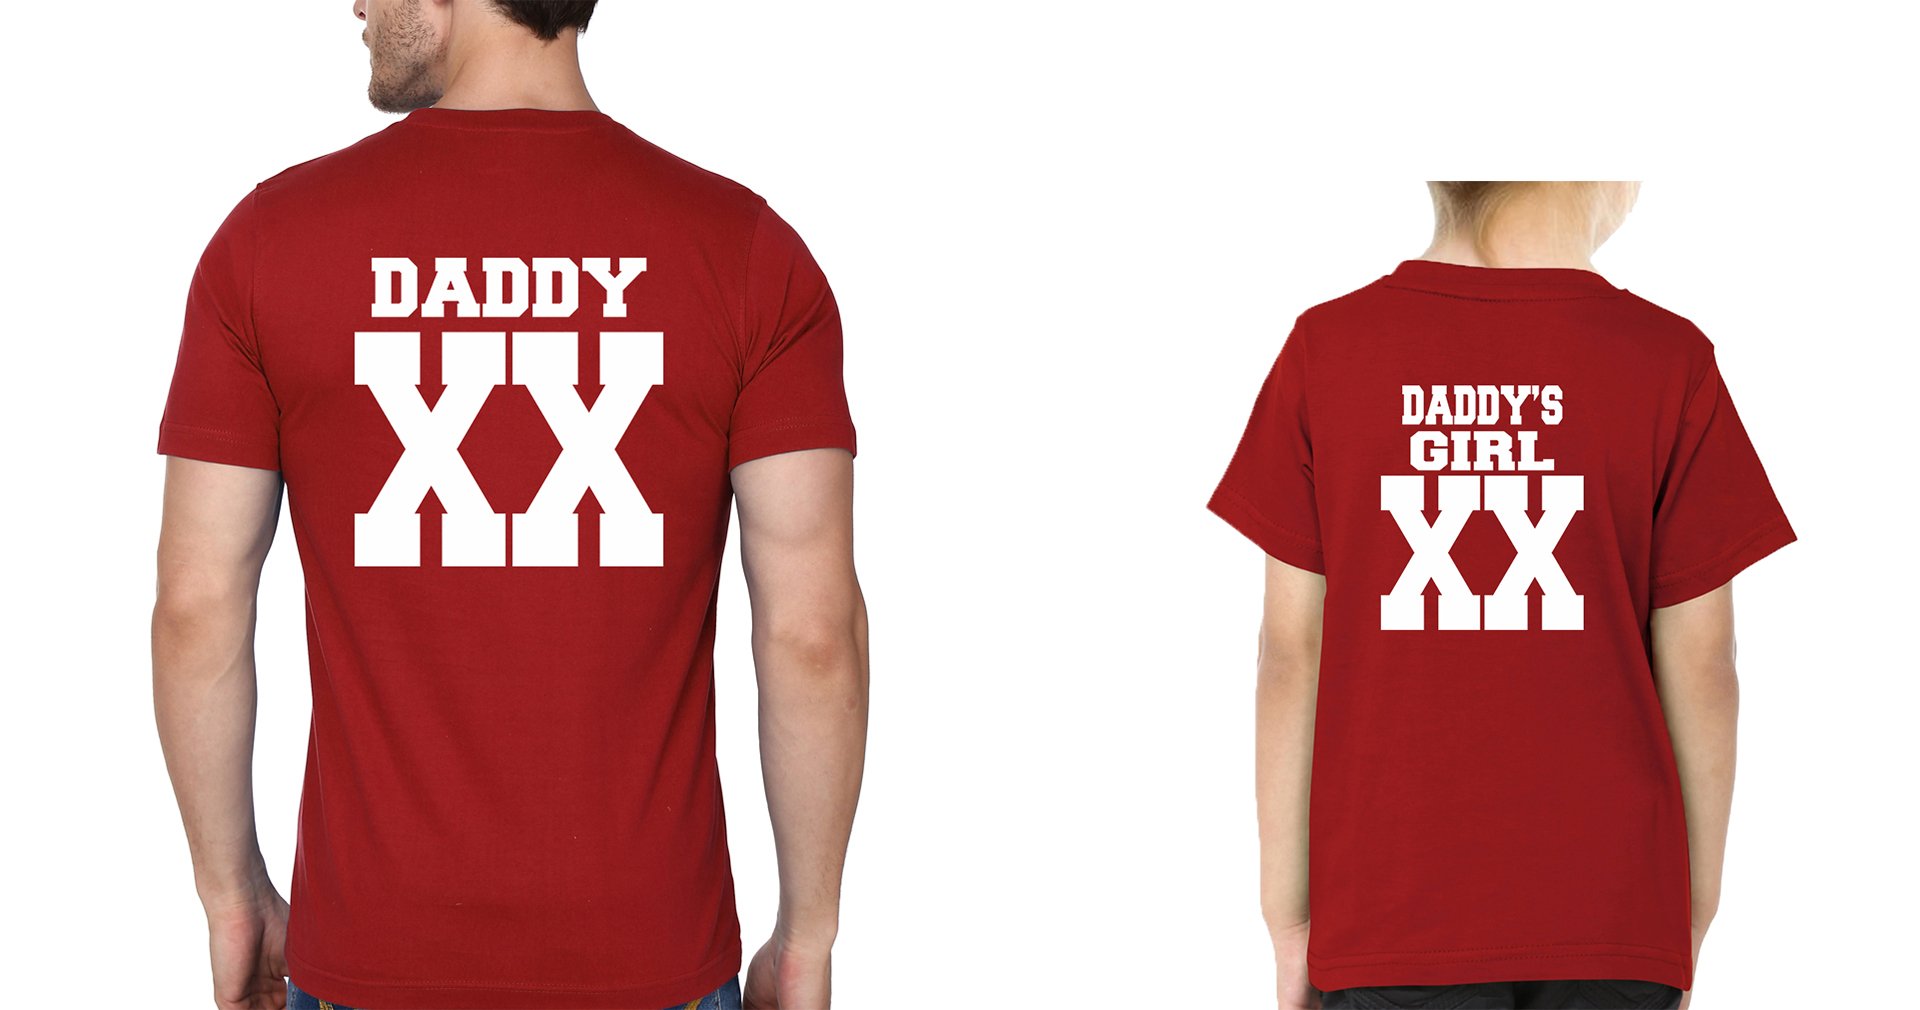 Daddy XX Daddy's Girl XX Father and Daughter Matching T-Shirt- FunkyTeesClub